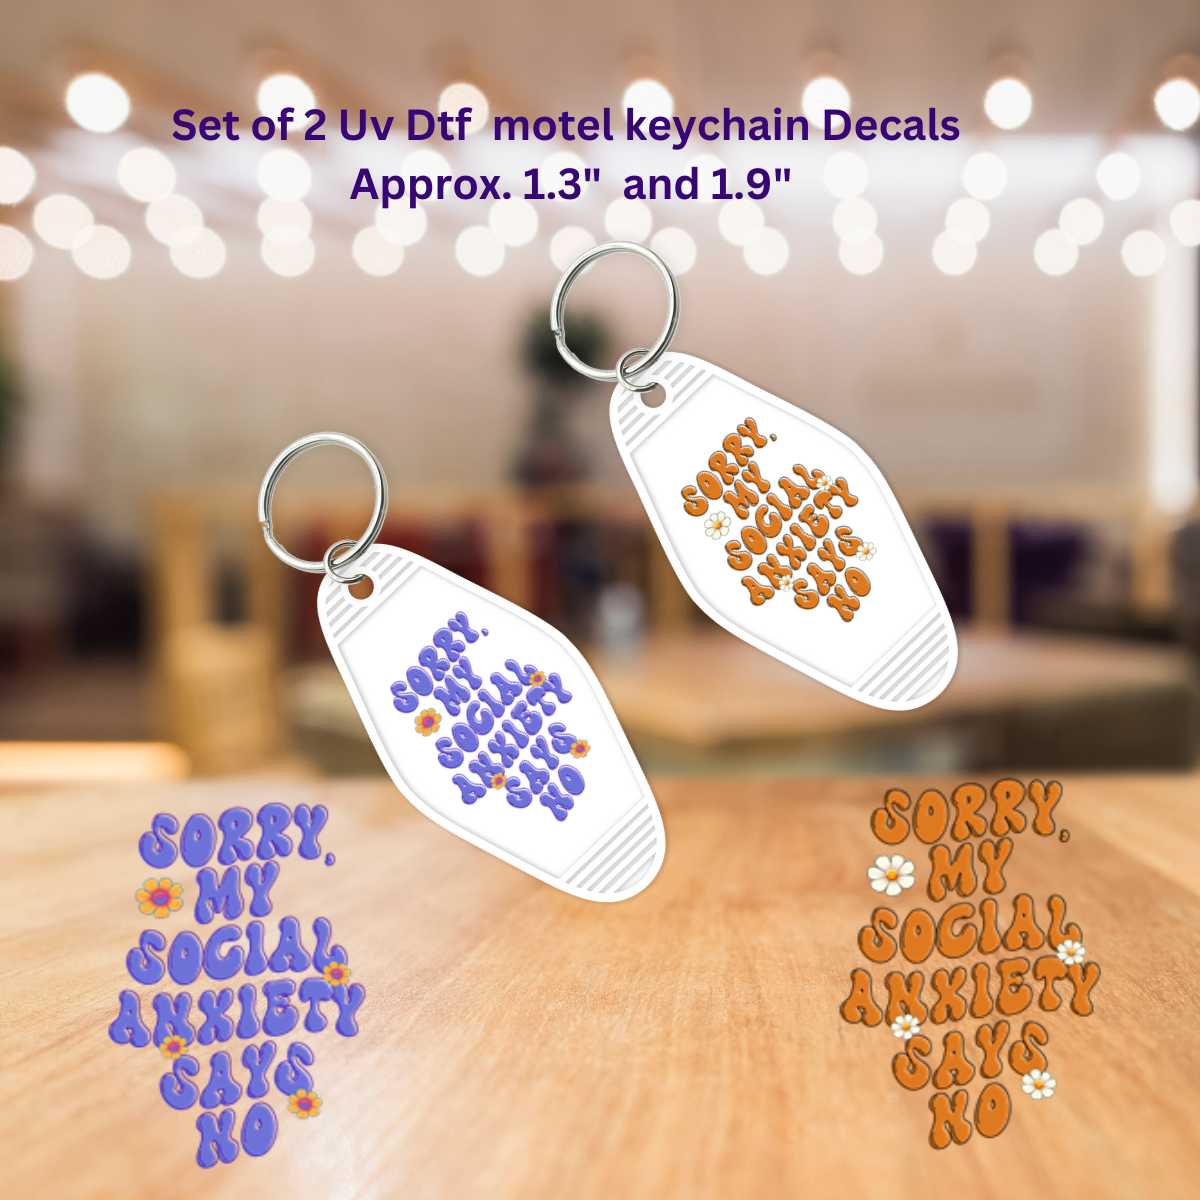 Set of 2 Uv Dtf Motel Keychain Decals Sorry My Social Anxiety Says No | Double Sided Key Chain Decal